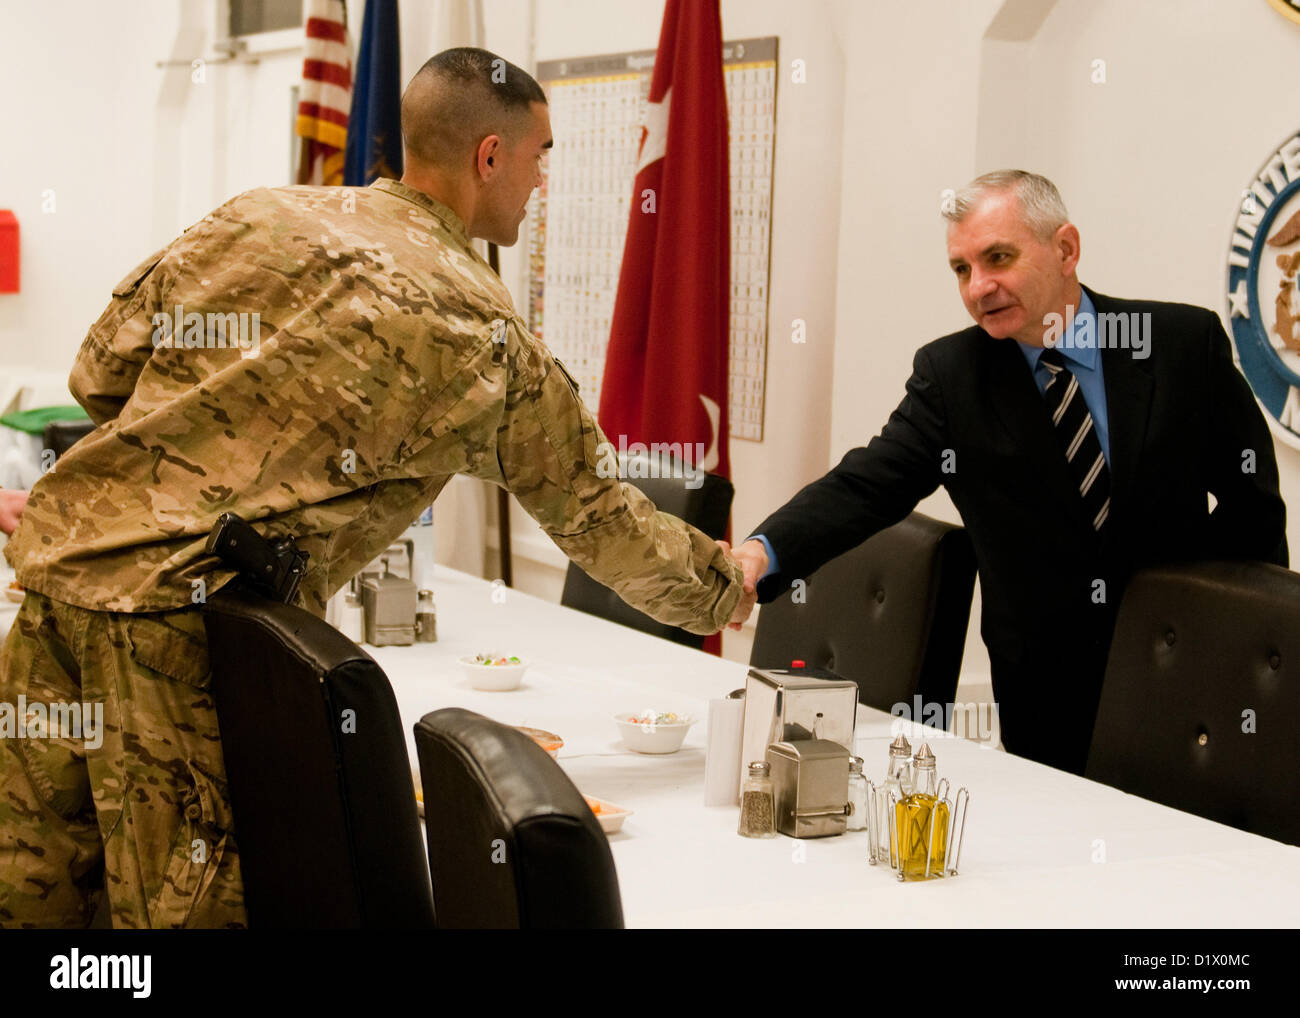 BAGRAM AIRFIELD, Afghanistan – U.S. Senator Jack Reed, senior senator for the state of Rhode Island, shakes hands with a U.S. Soldier attached to Combined Joint Task-1, 1st Infantry Division, during a constituent breakfast at Bagram Airfield, Afghanistan, Jan. 7, 2013. Reed and U.S. Senator Carl Levin, state senator for Michigan, visited troops from their respective states to boost morale and discuss U.S. efforts in Afghanistan. (U.S. Army photo by Sgt. Christopher Bonebrake, 115th Mobile Public Affairs Detachment) Stock Photo